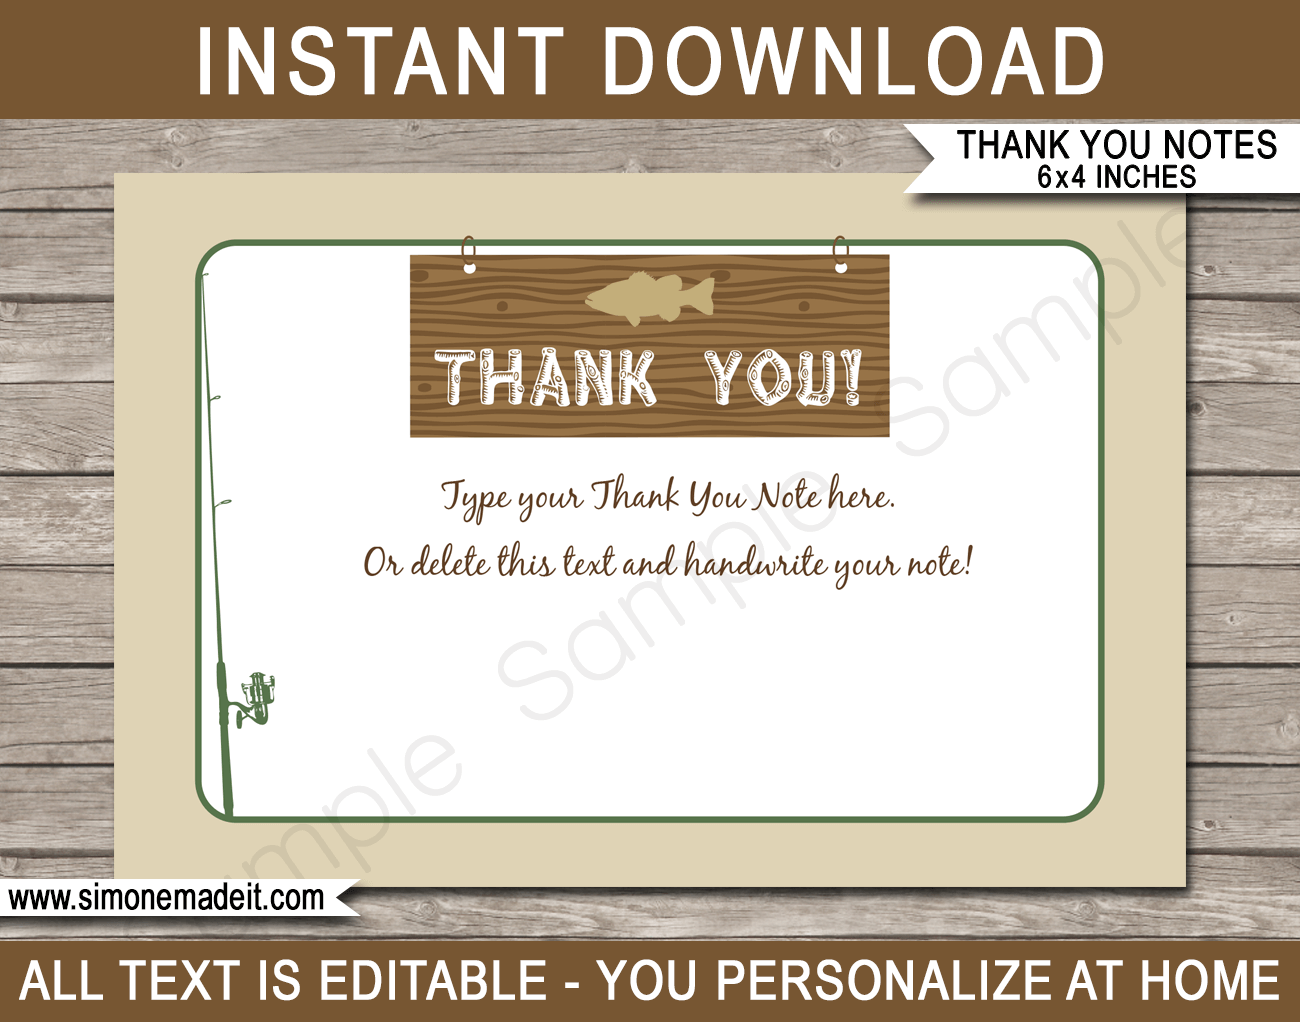 Printable Fishing Party Thank You Cards - Favor Tags - Fishing Birthday Party theme - Editable Template - Instant Download via simonemadeit.com